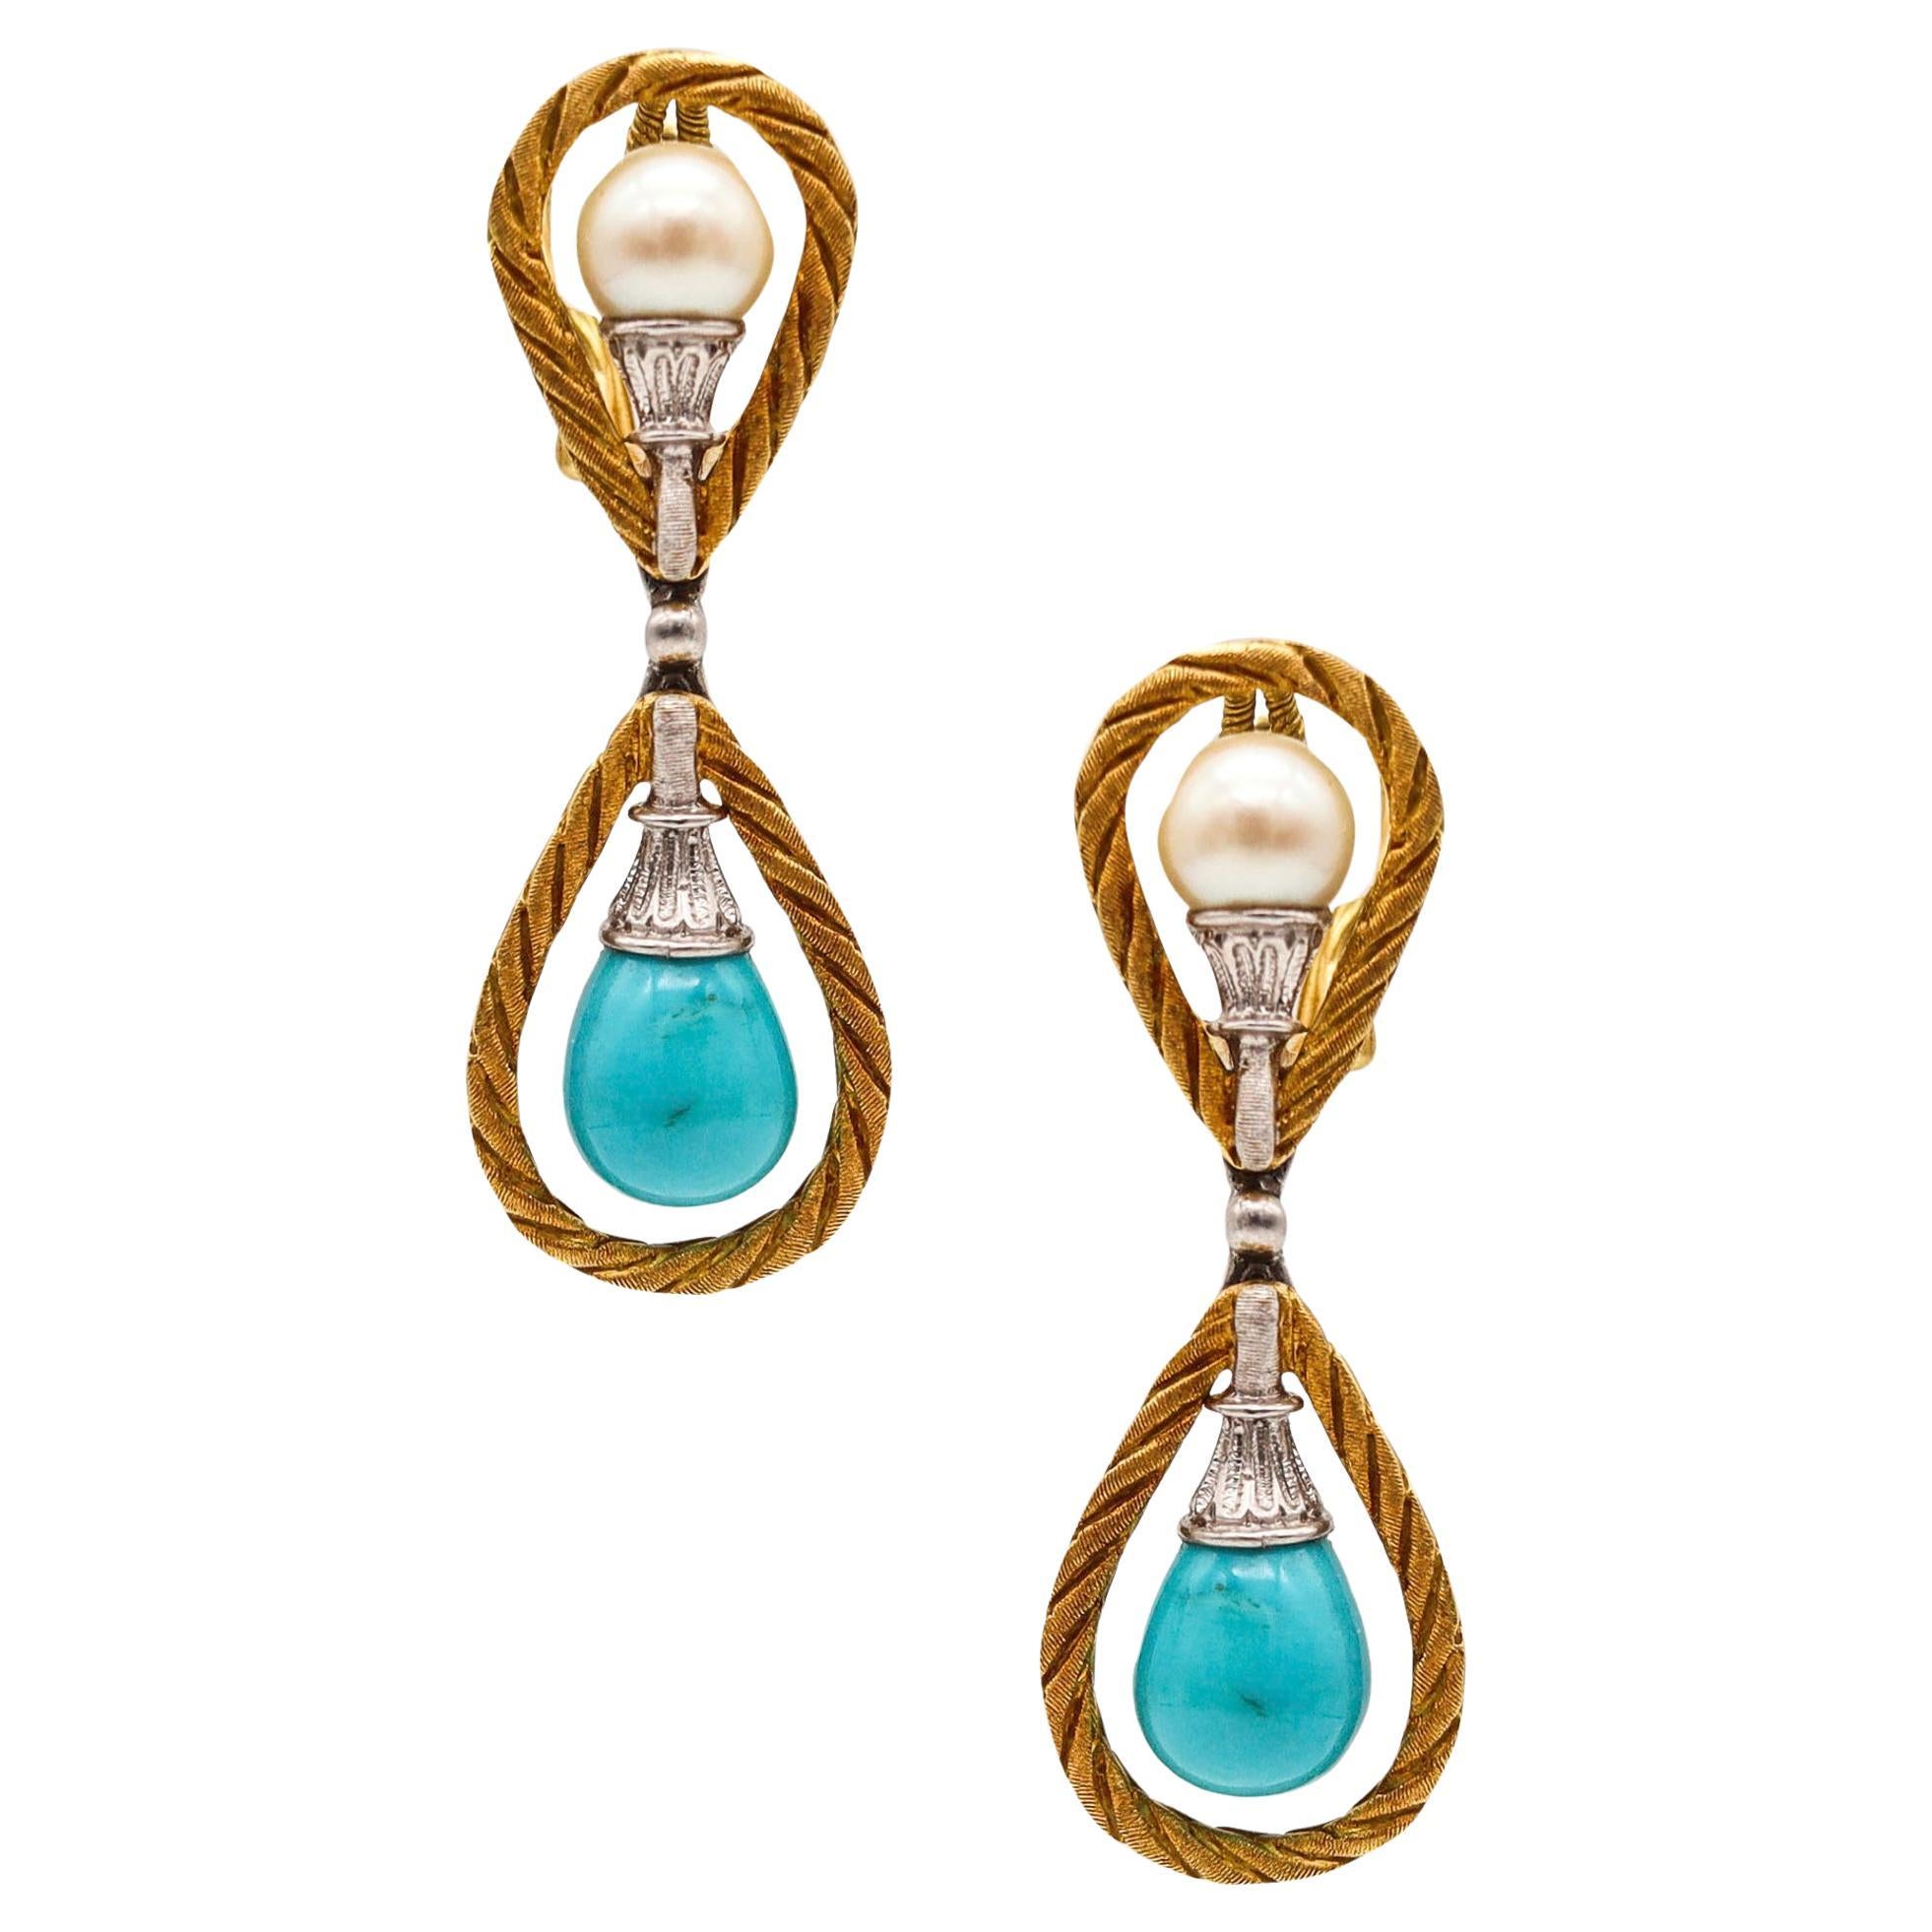 Mario Buccellati 1970 Dangle Earrings In 18Kt Gold With Turquoises and Pearls For Sale